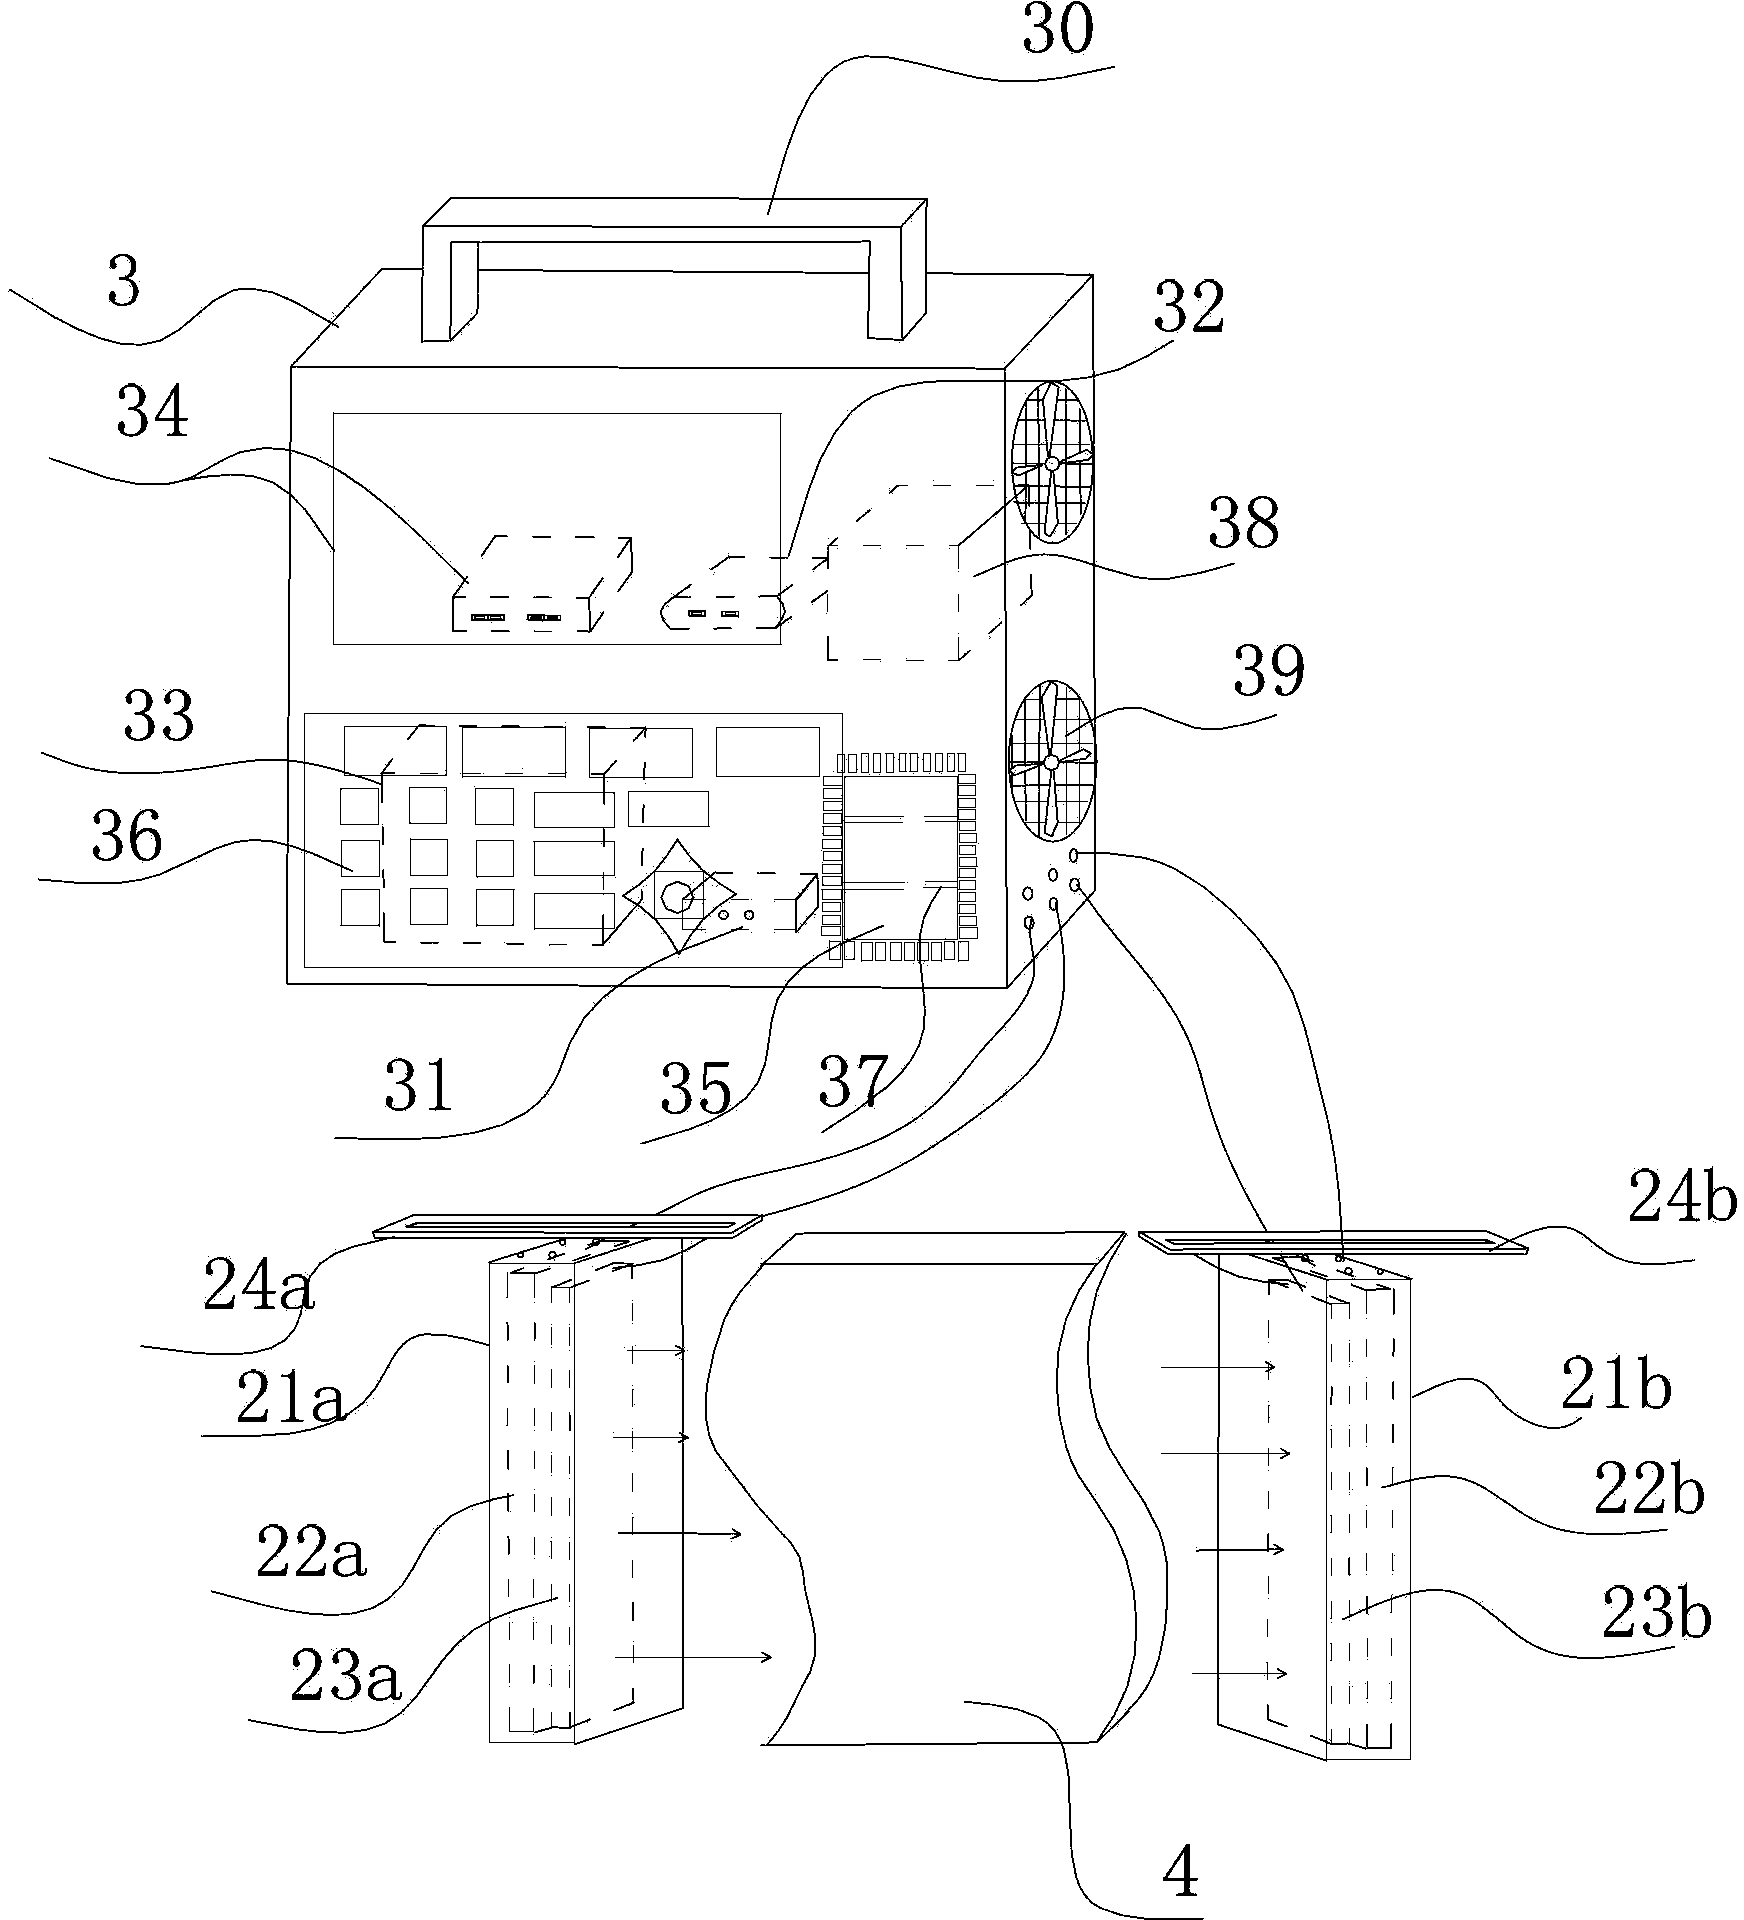 Device and method for automatically monitoring and evaluating soil parameters